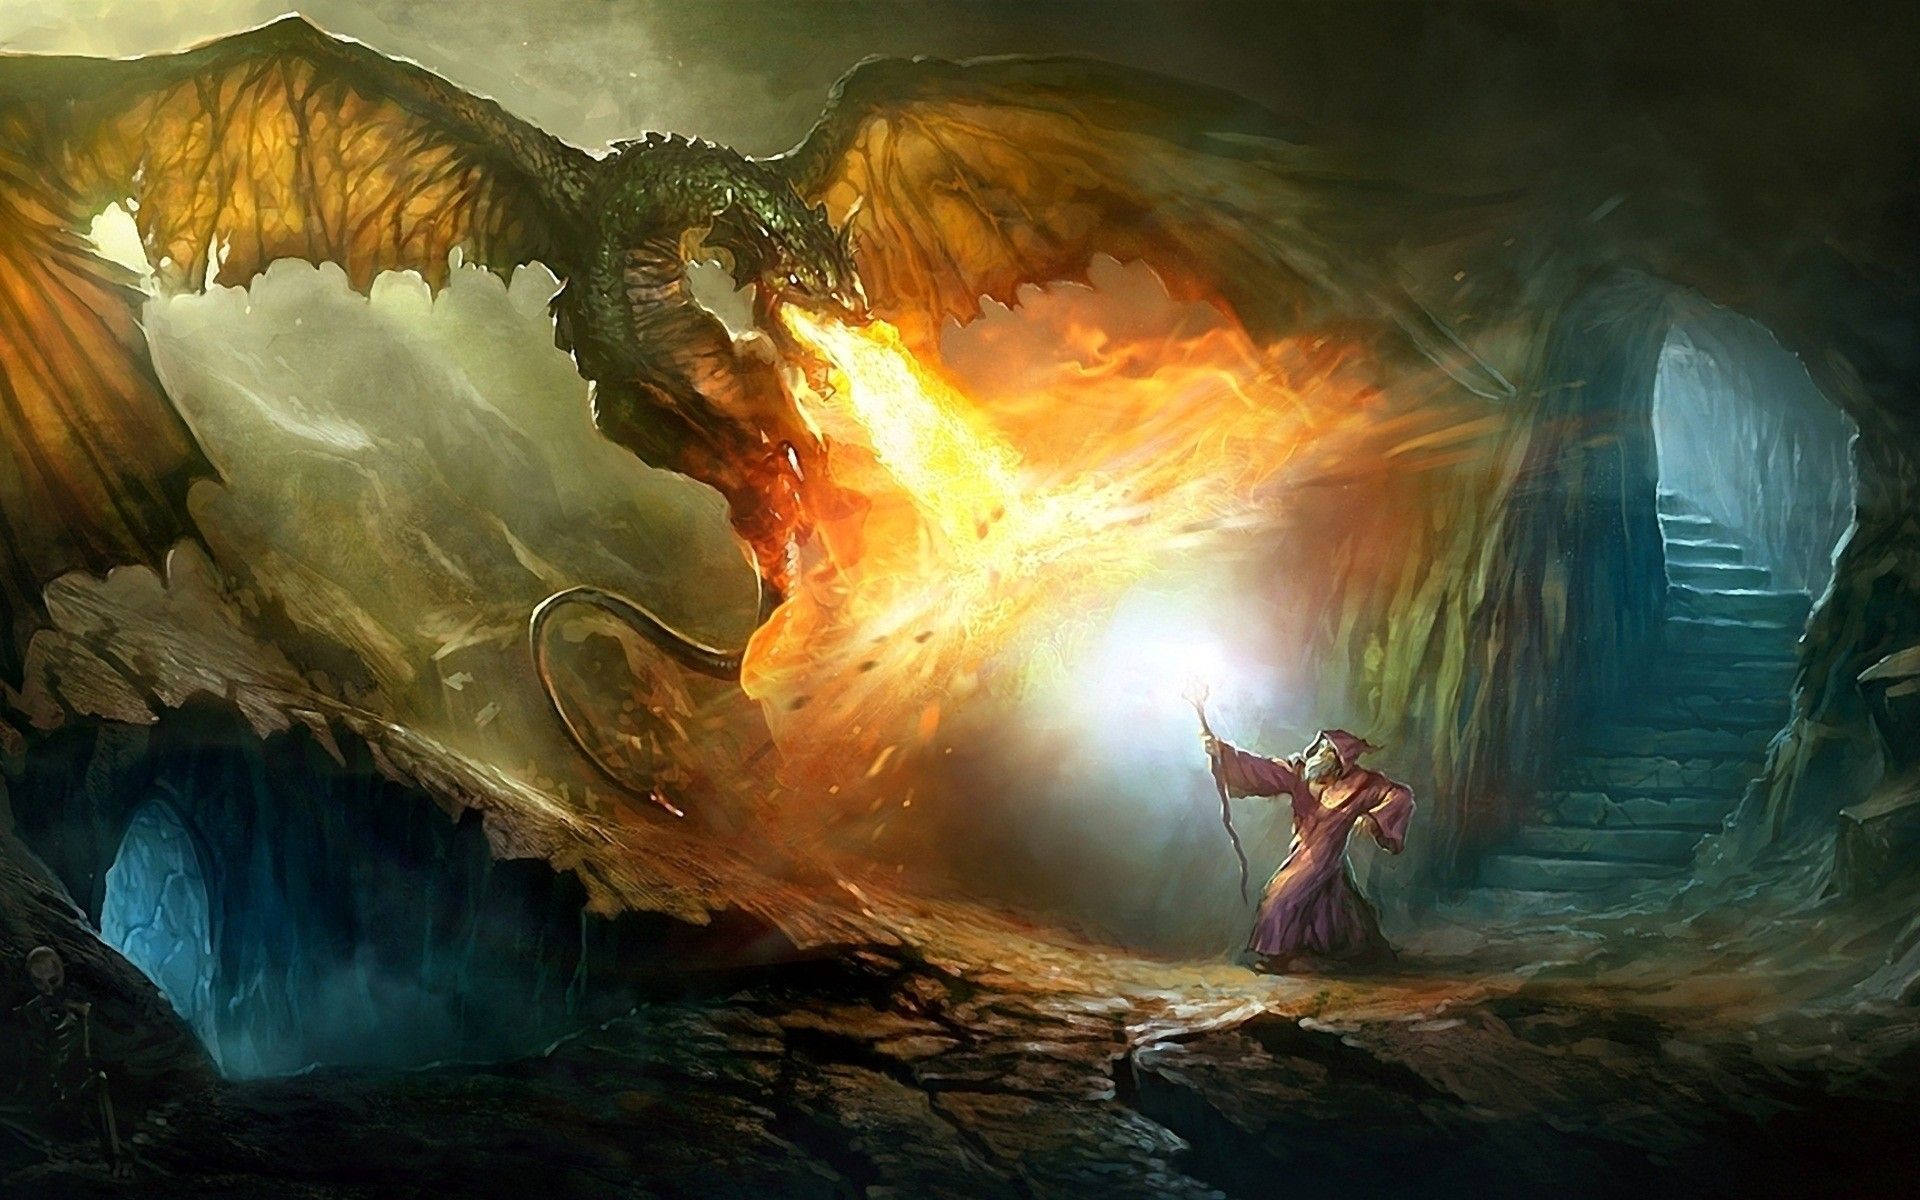 Wizards and Dragons Wallpaper Free Wizards and Dragons